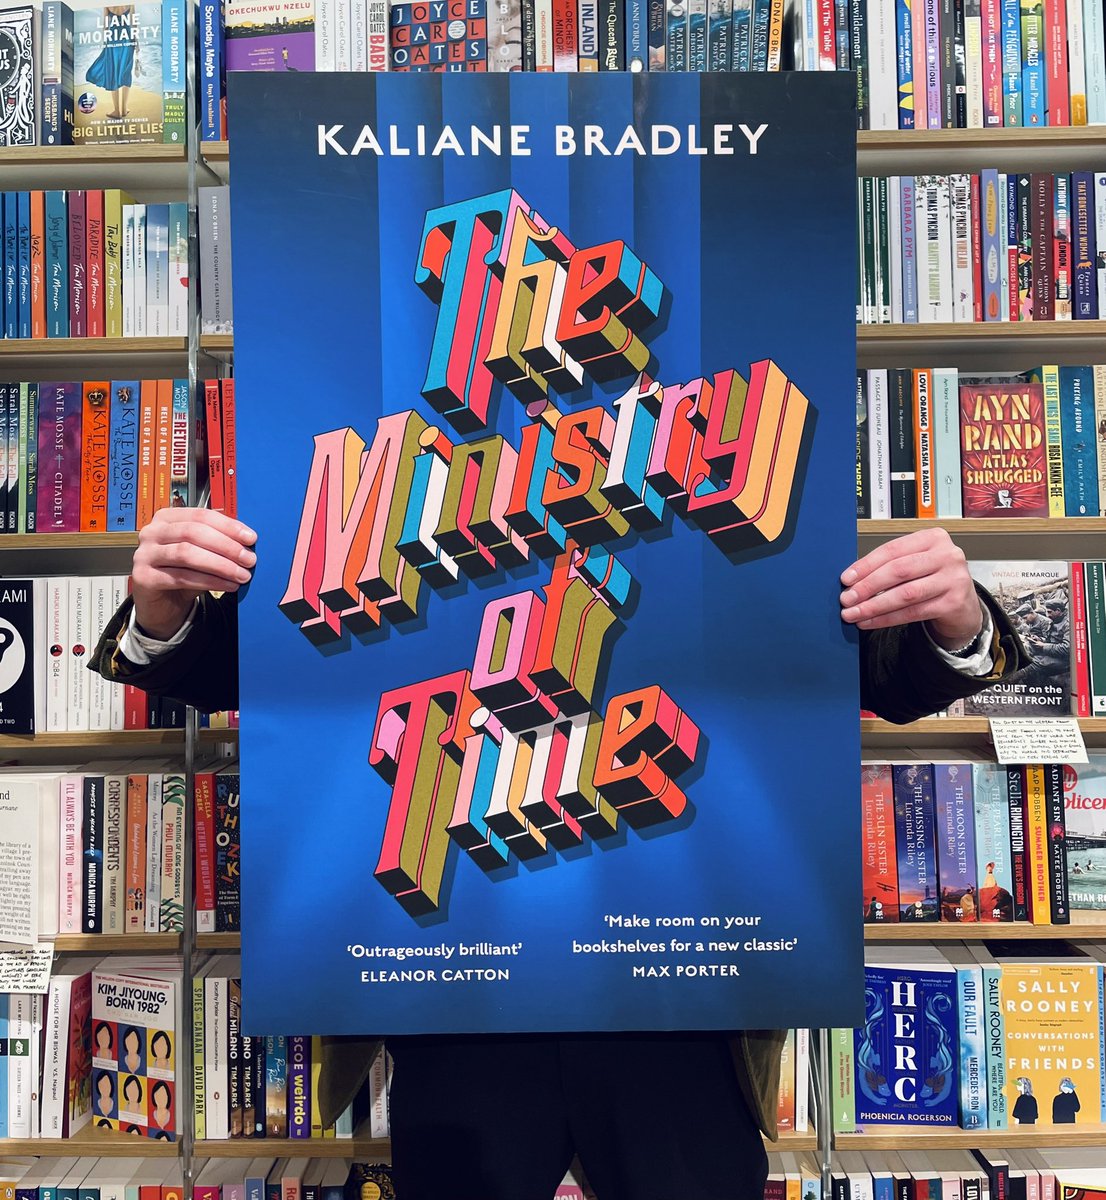 Less than two weeks until the release of The Ministry of Time! We can’t wait to have Kaliane in store on the 22nd of May - grab a ticket while you can! bit.ly/3vYD1yj